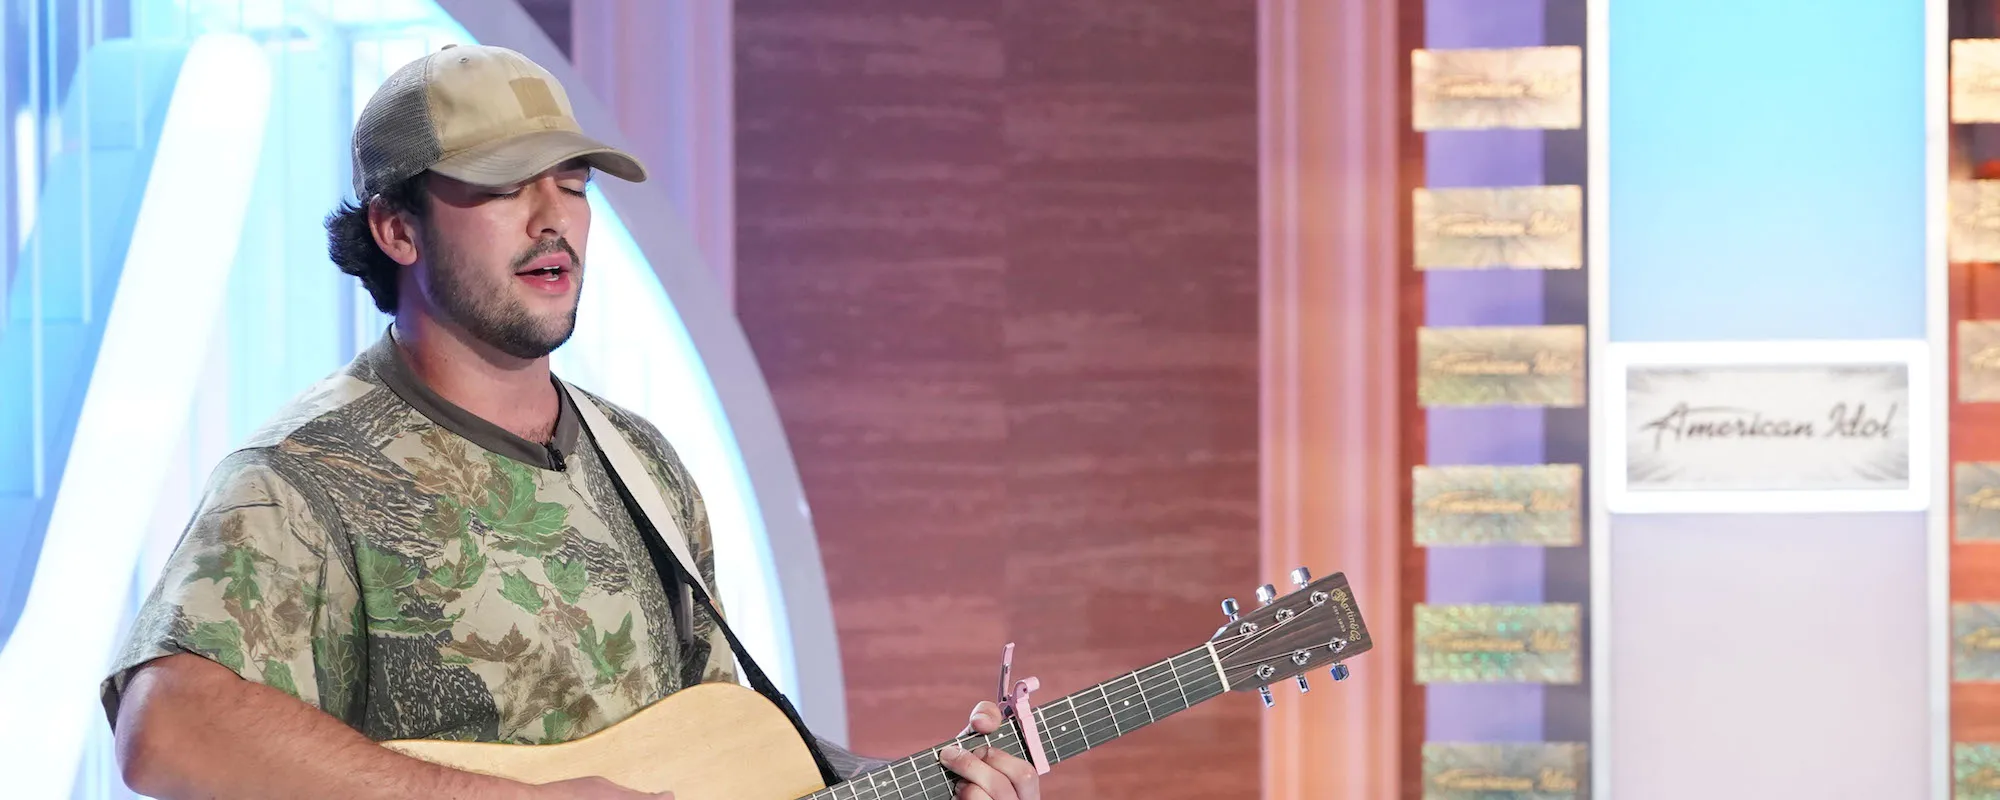 Preston Duffee Shares Original Country Ballad in Honor of Late Mother on ‘American Idol’